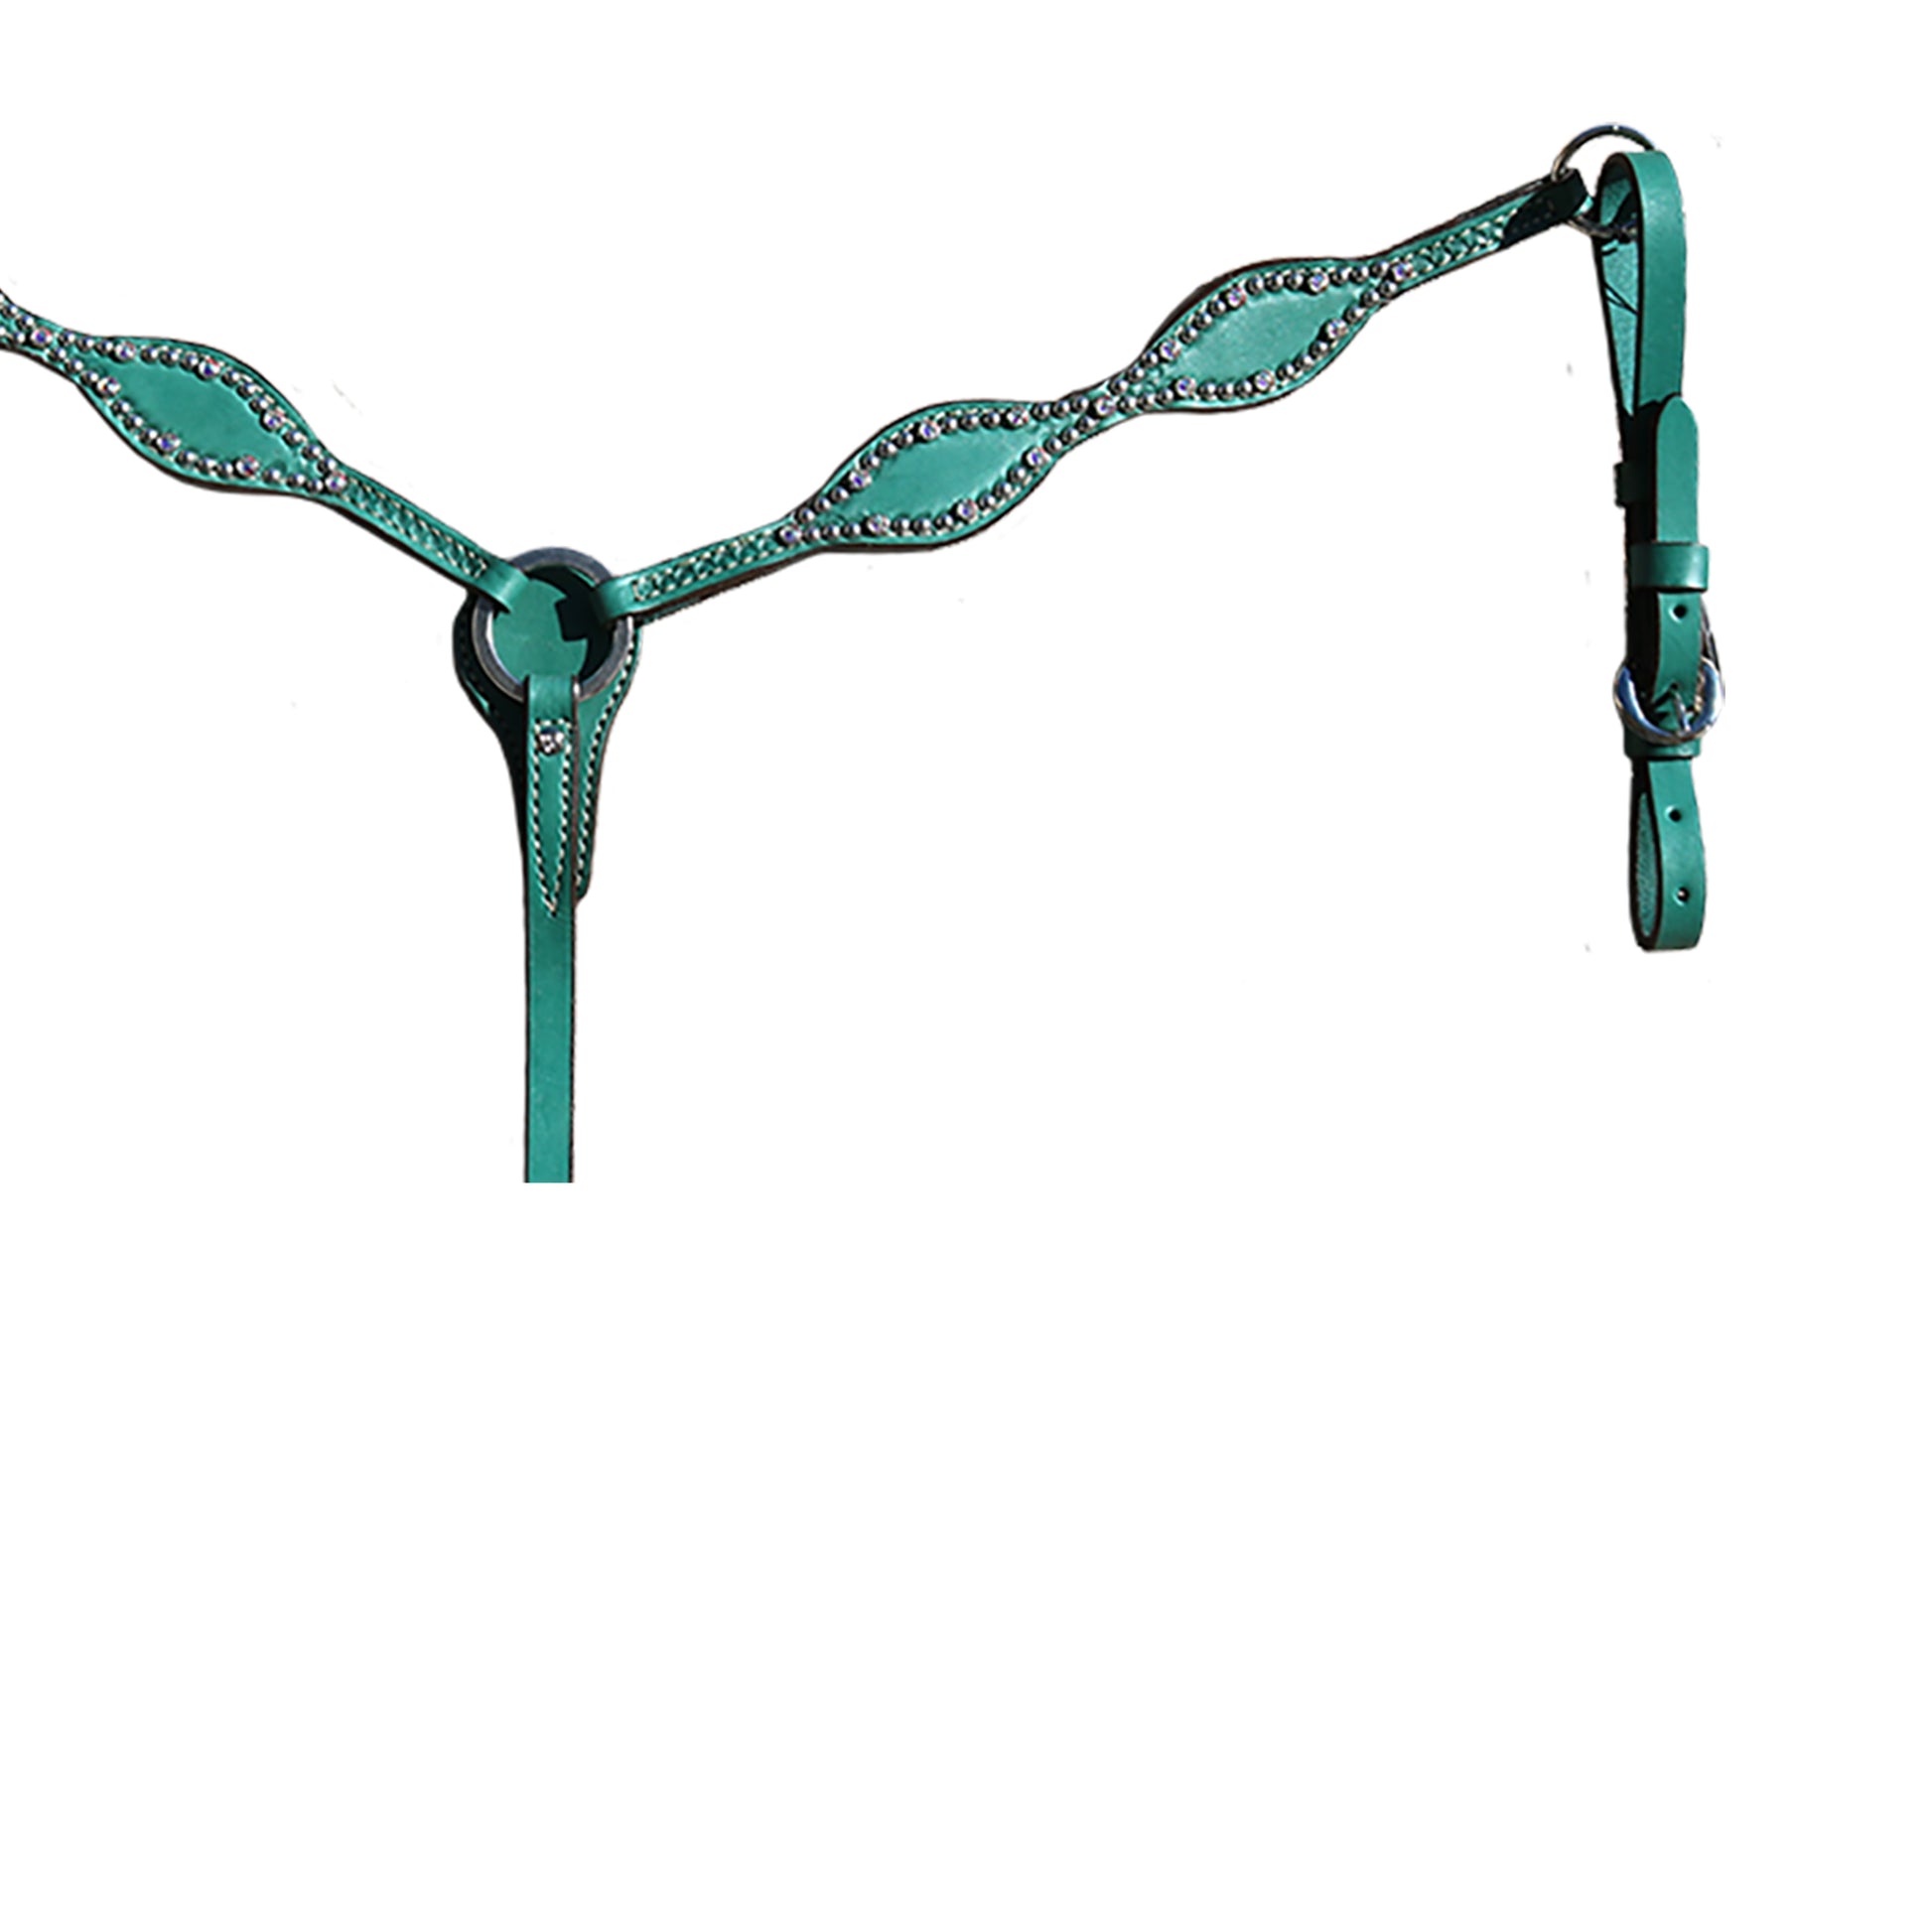 2" Scalloped breast collar turquoise leather with Swarovski crystals and SS spots (color may vary).